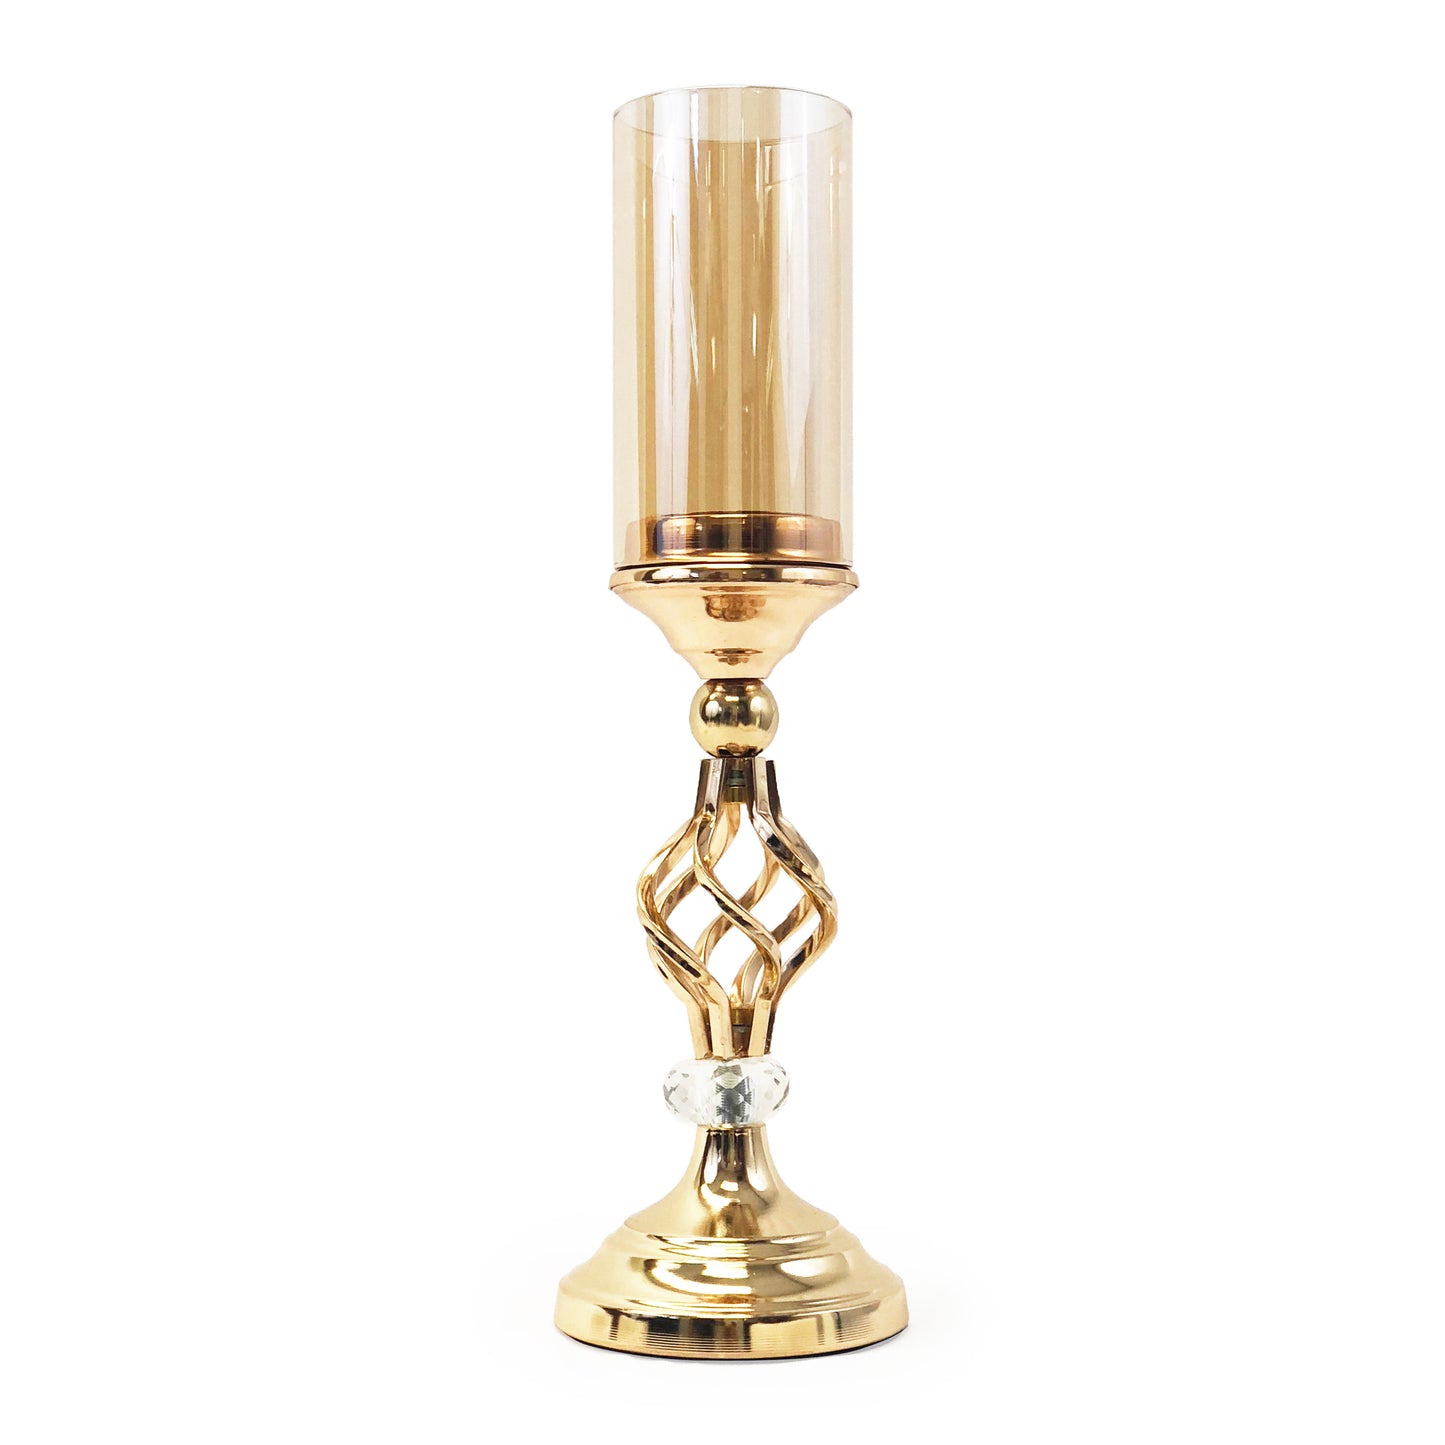 allgala 16" Crystal Gold Plated Tealight Votive Decorative Candle Holder with Hurrican Cover